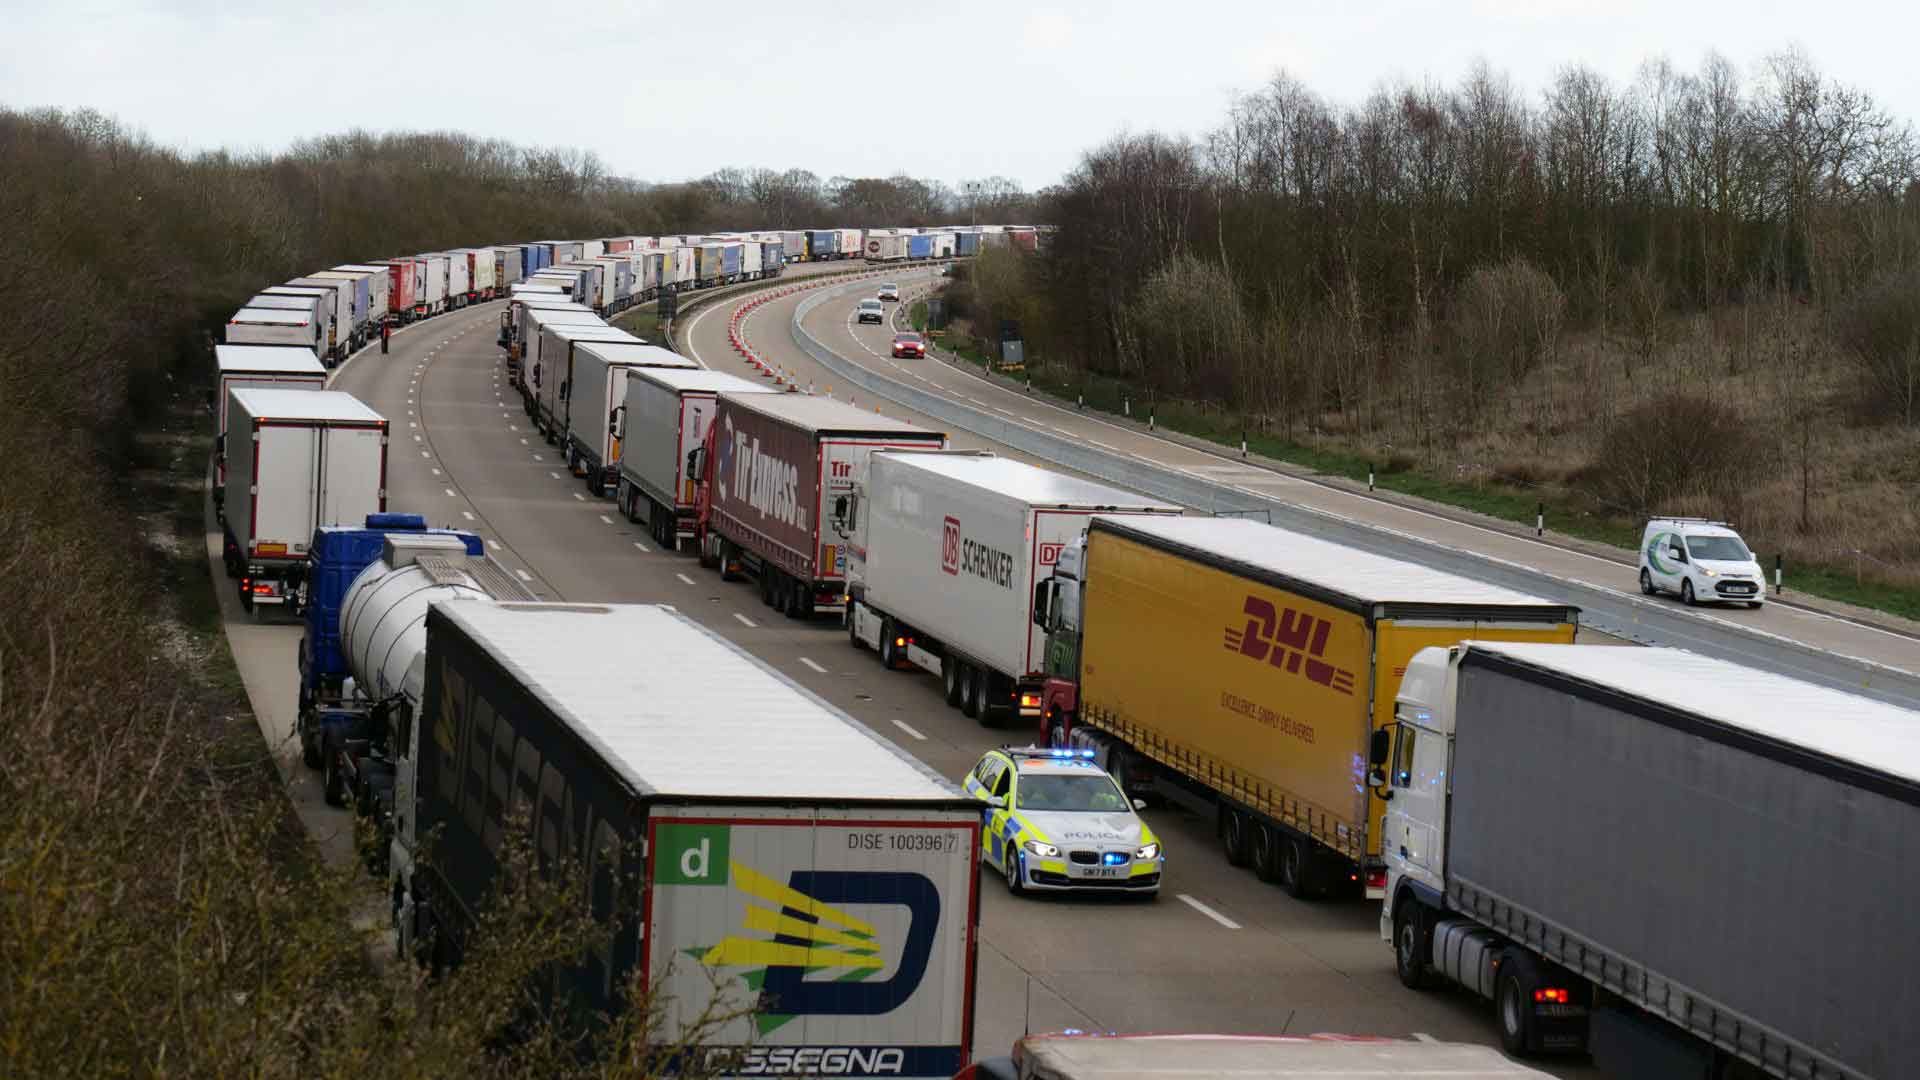 Queuing trucks on the M20 in Kent